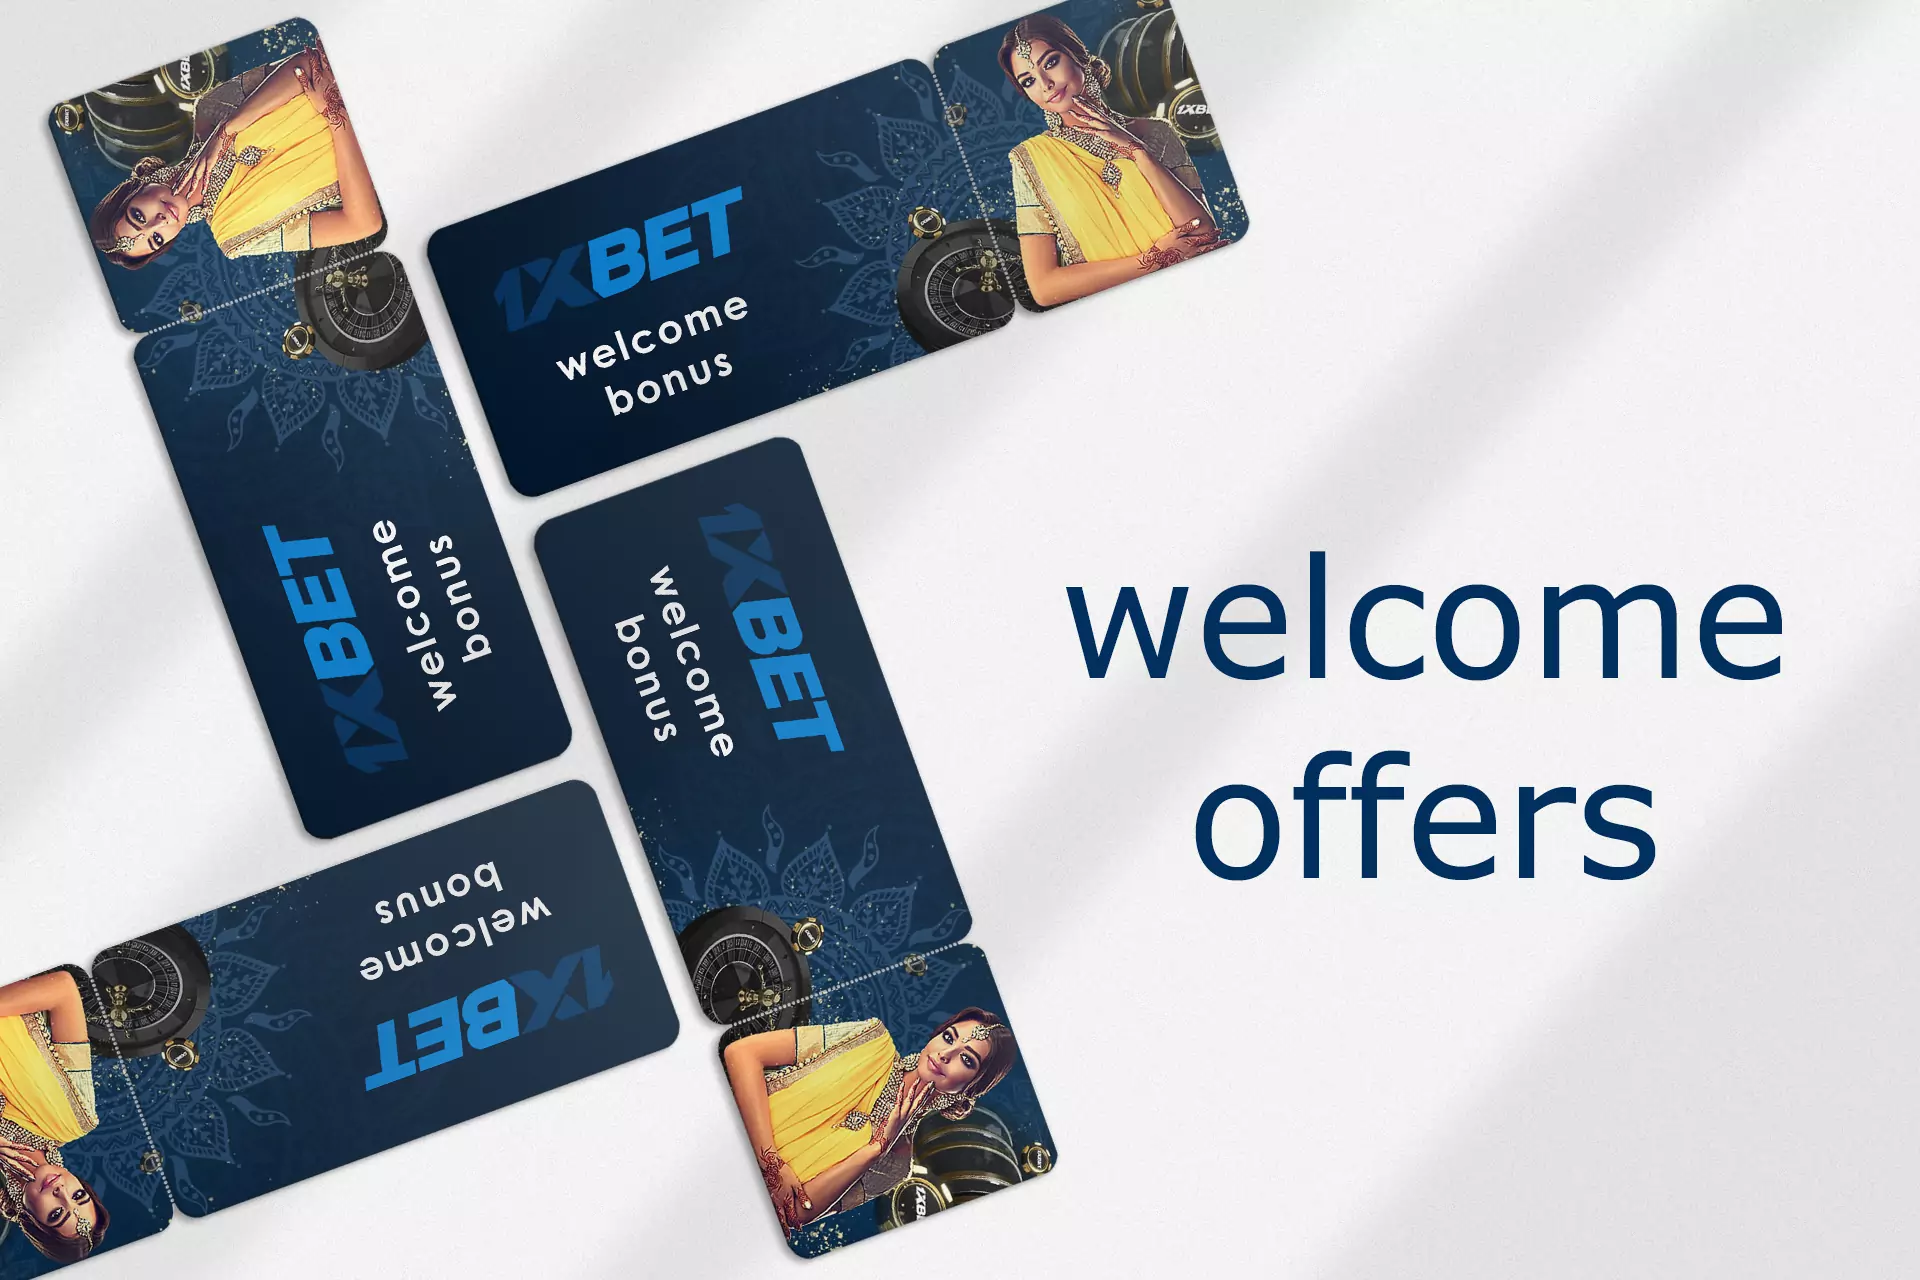 You can use the welcome offer of 1xbet if you make a deposit to your betting account.